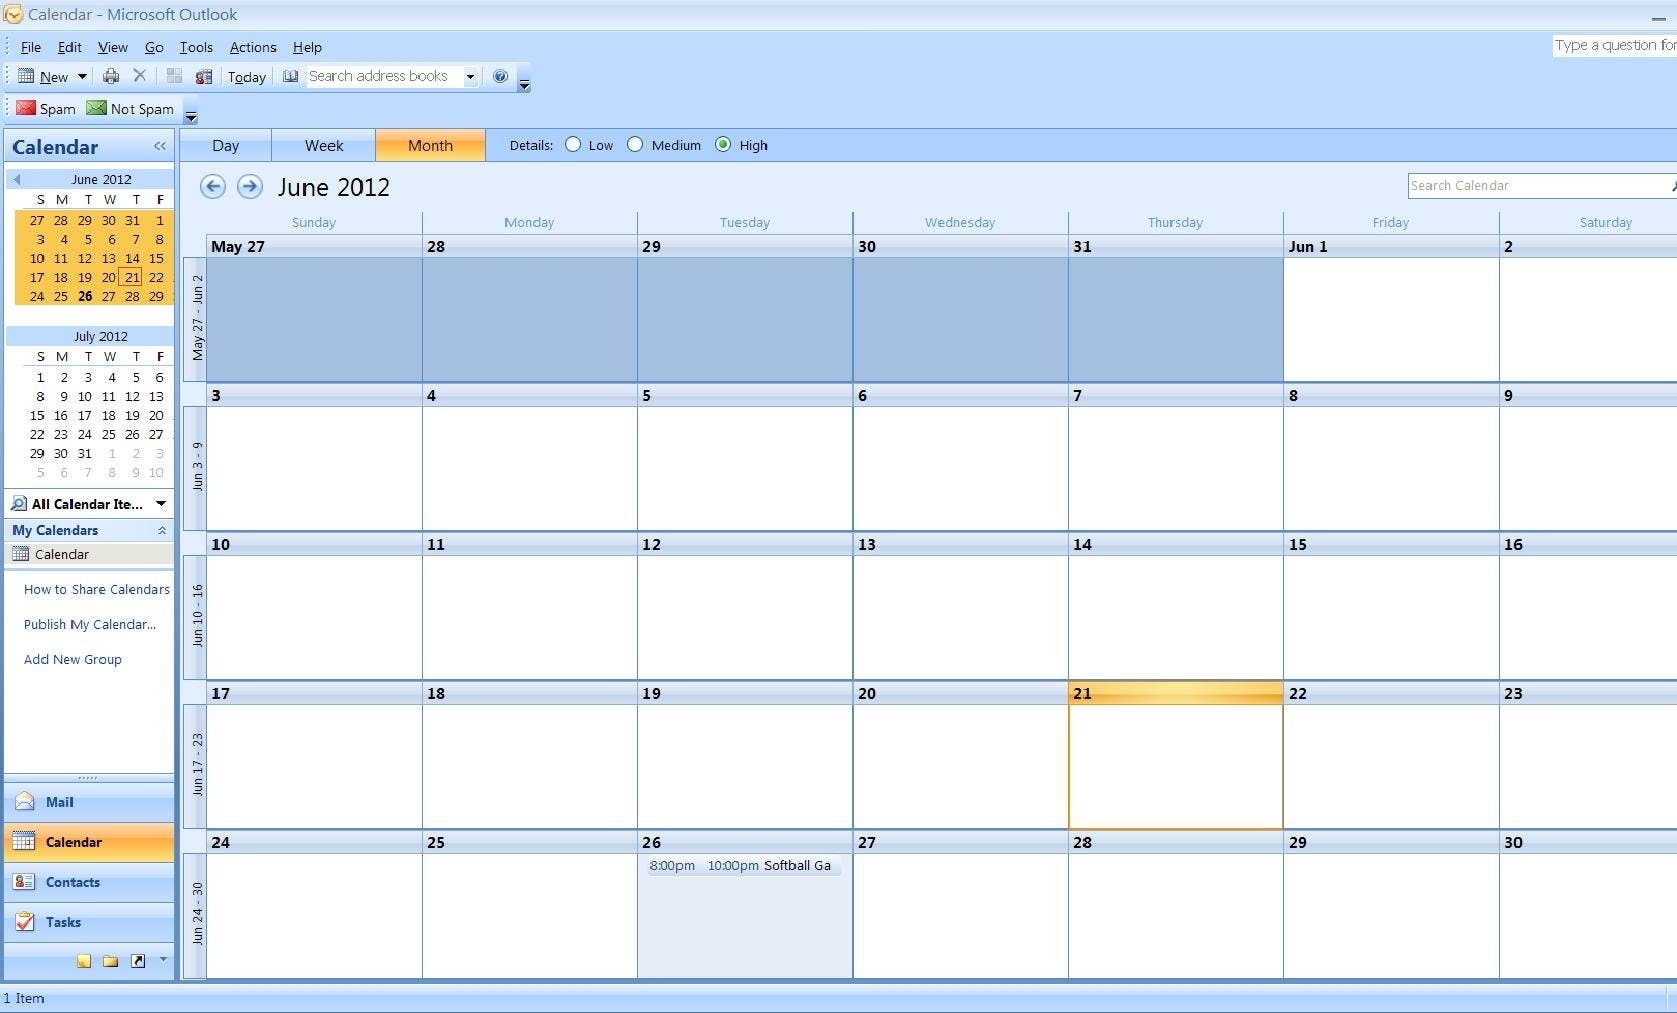 How To Import A Calendar From Excel To Outlook - Turbofuture Calendar Upload Template In Excel